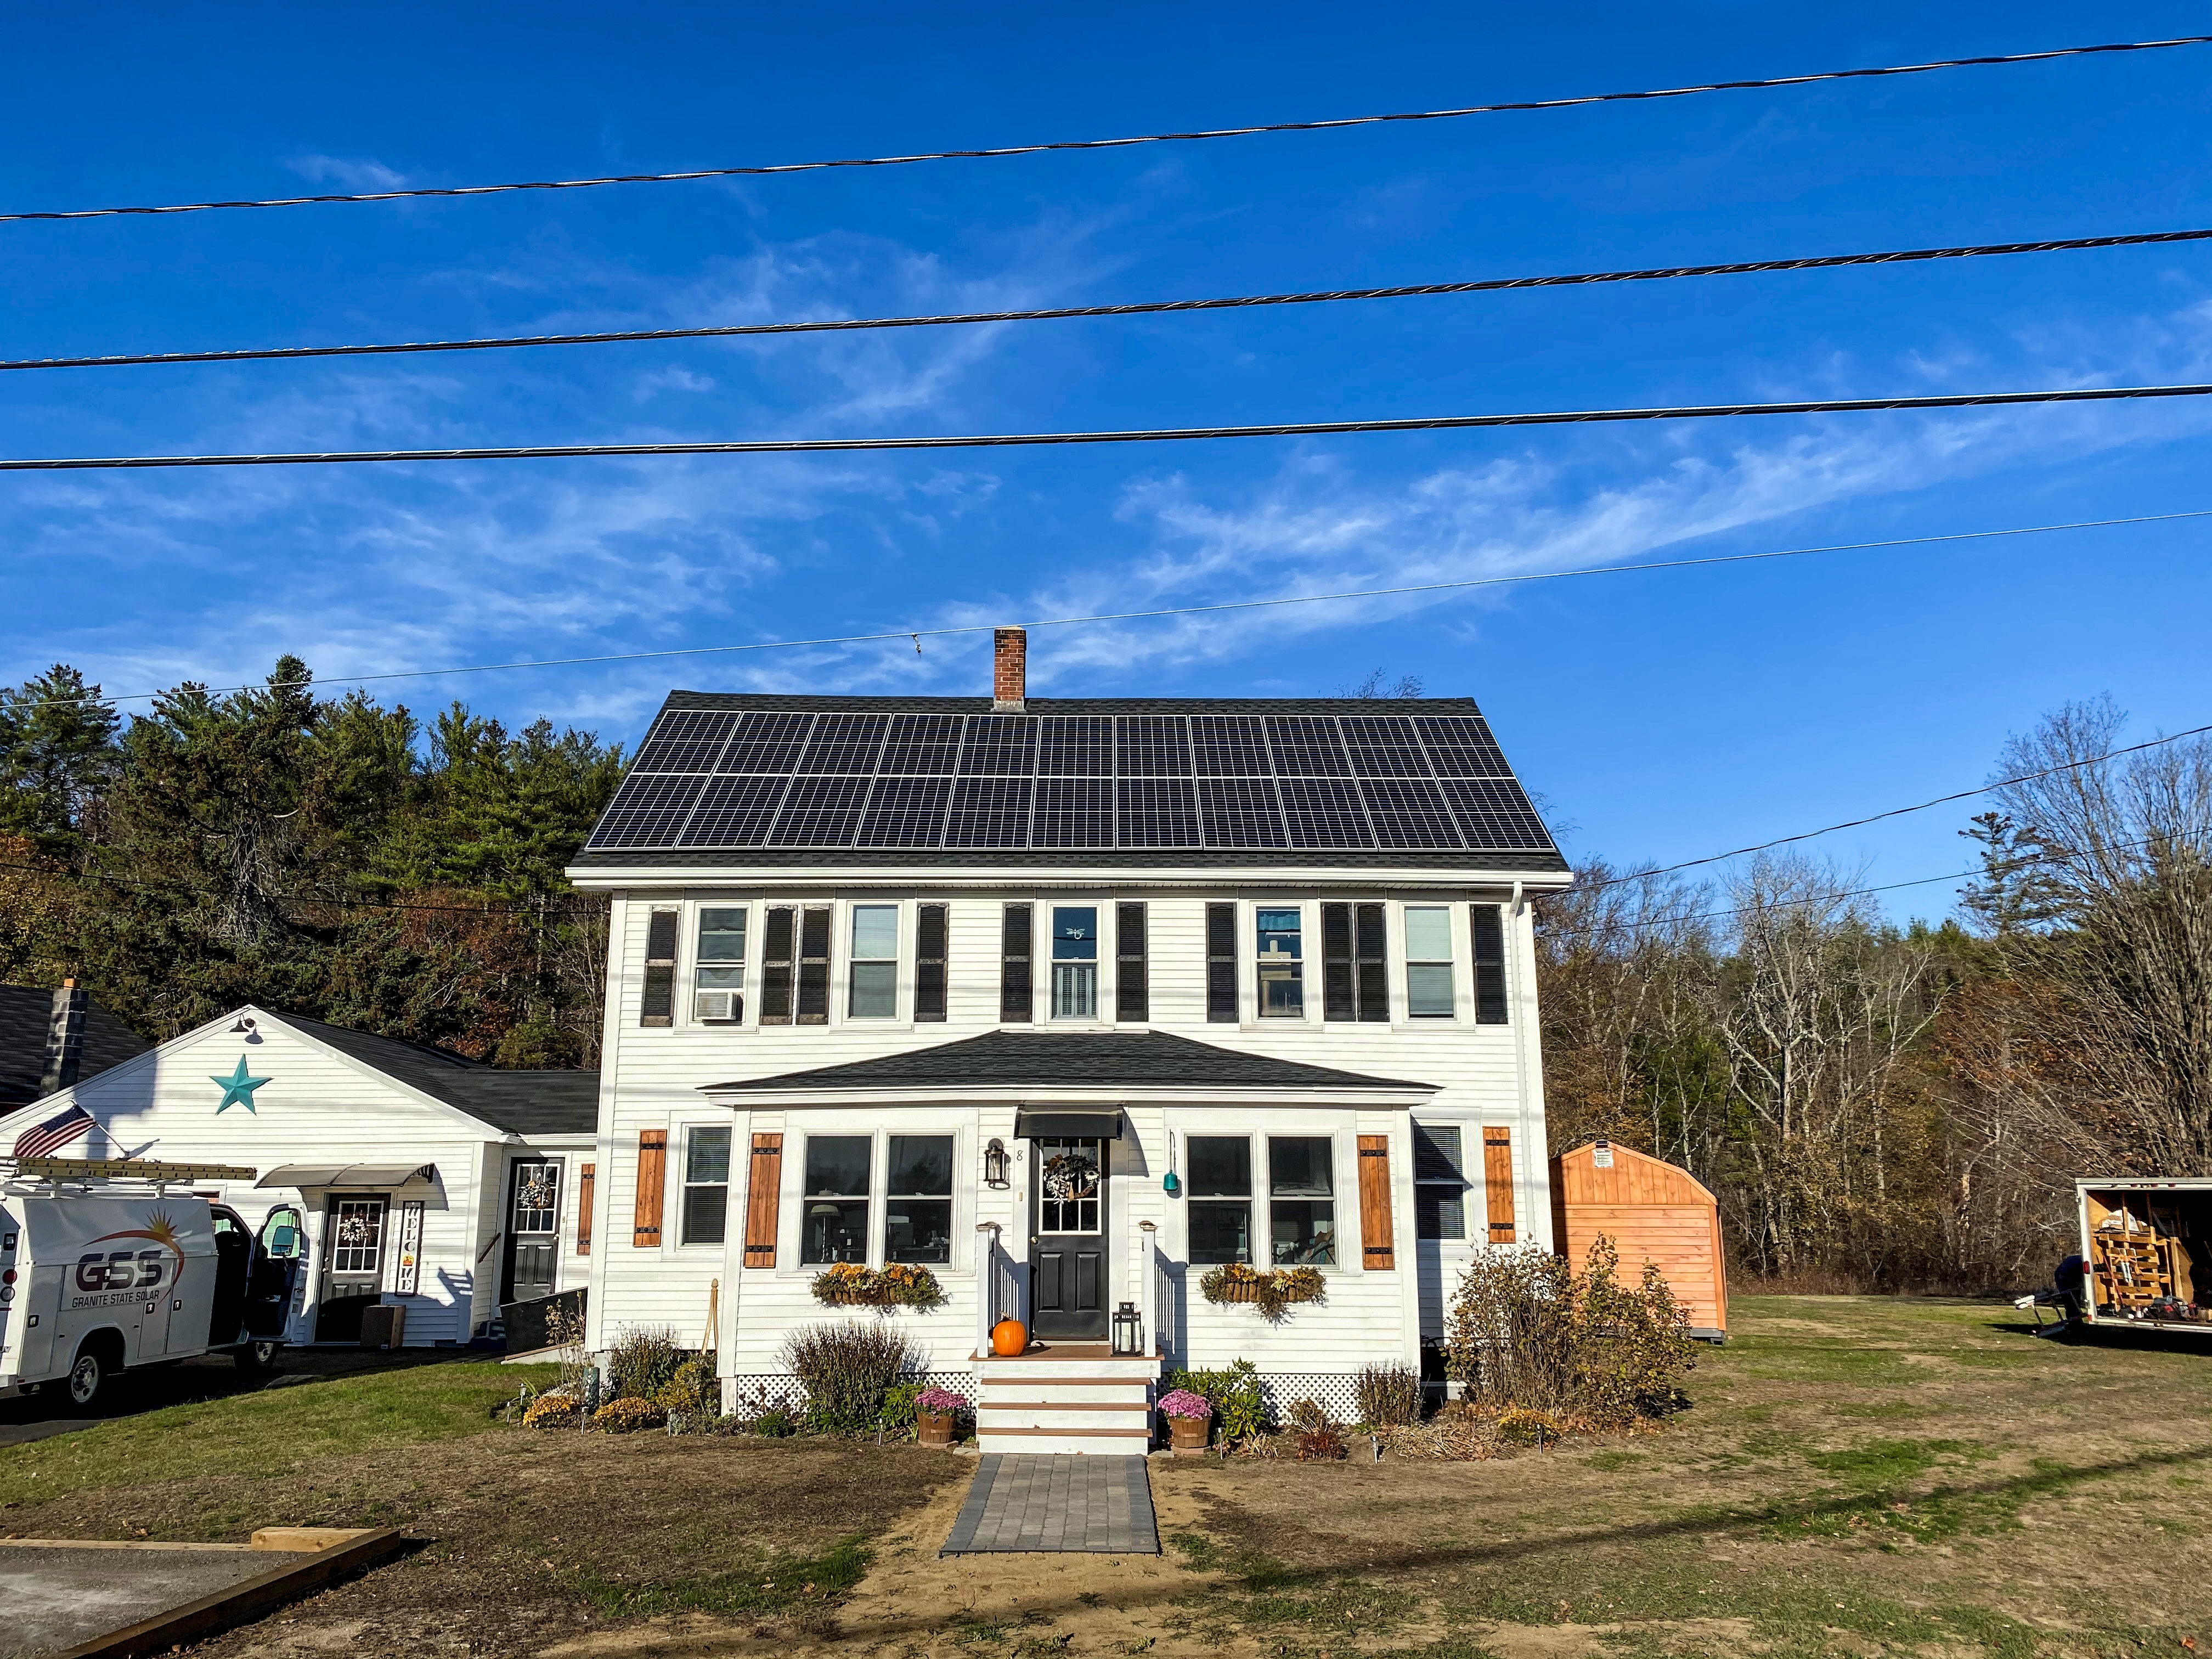 Solar Panels and Asphalt Shingles: Separating Fact from Fiction